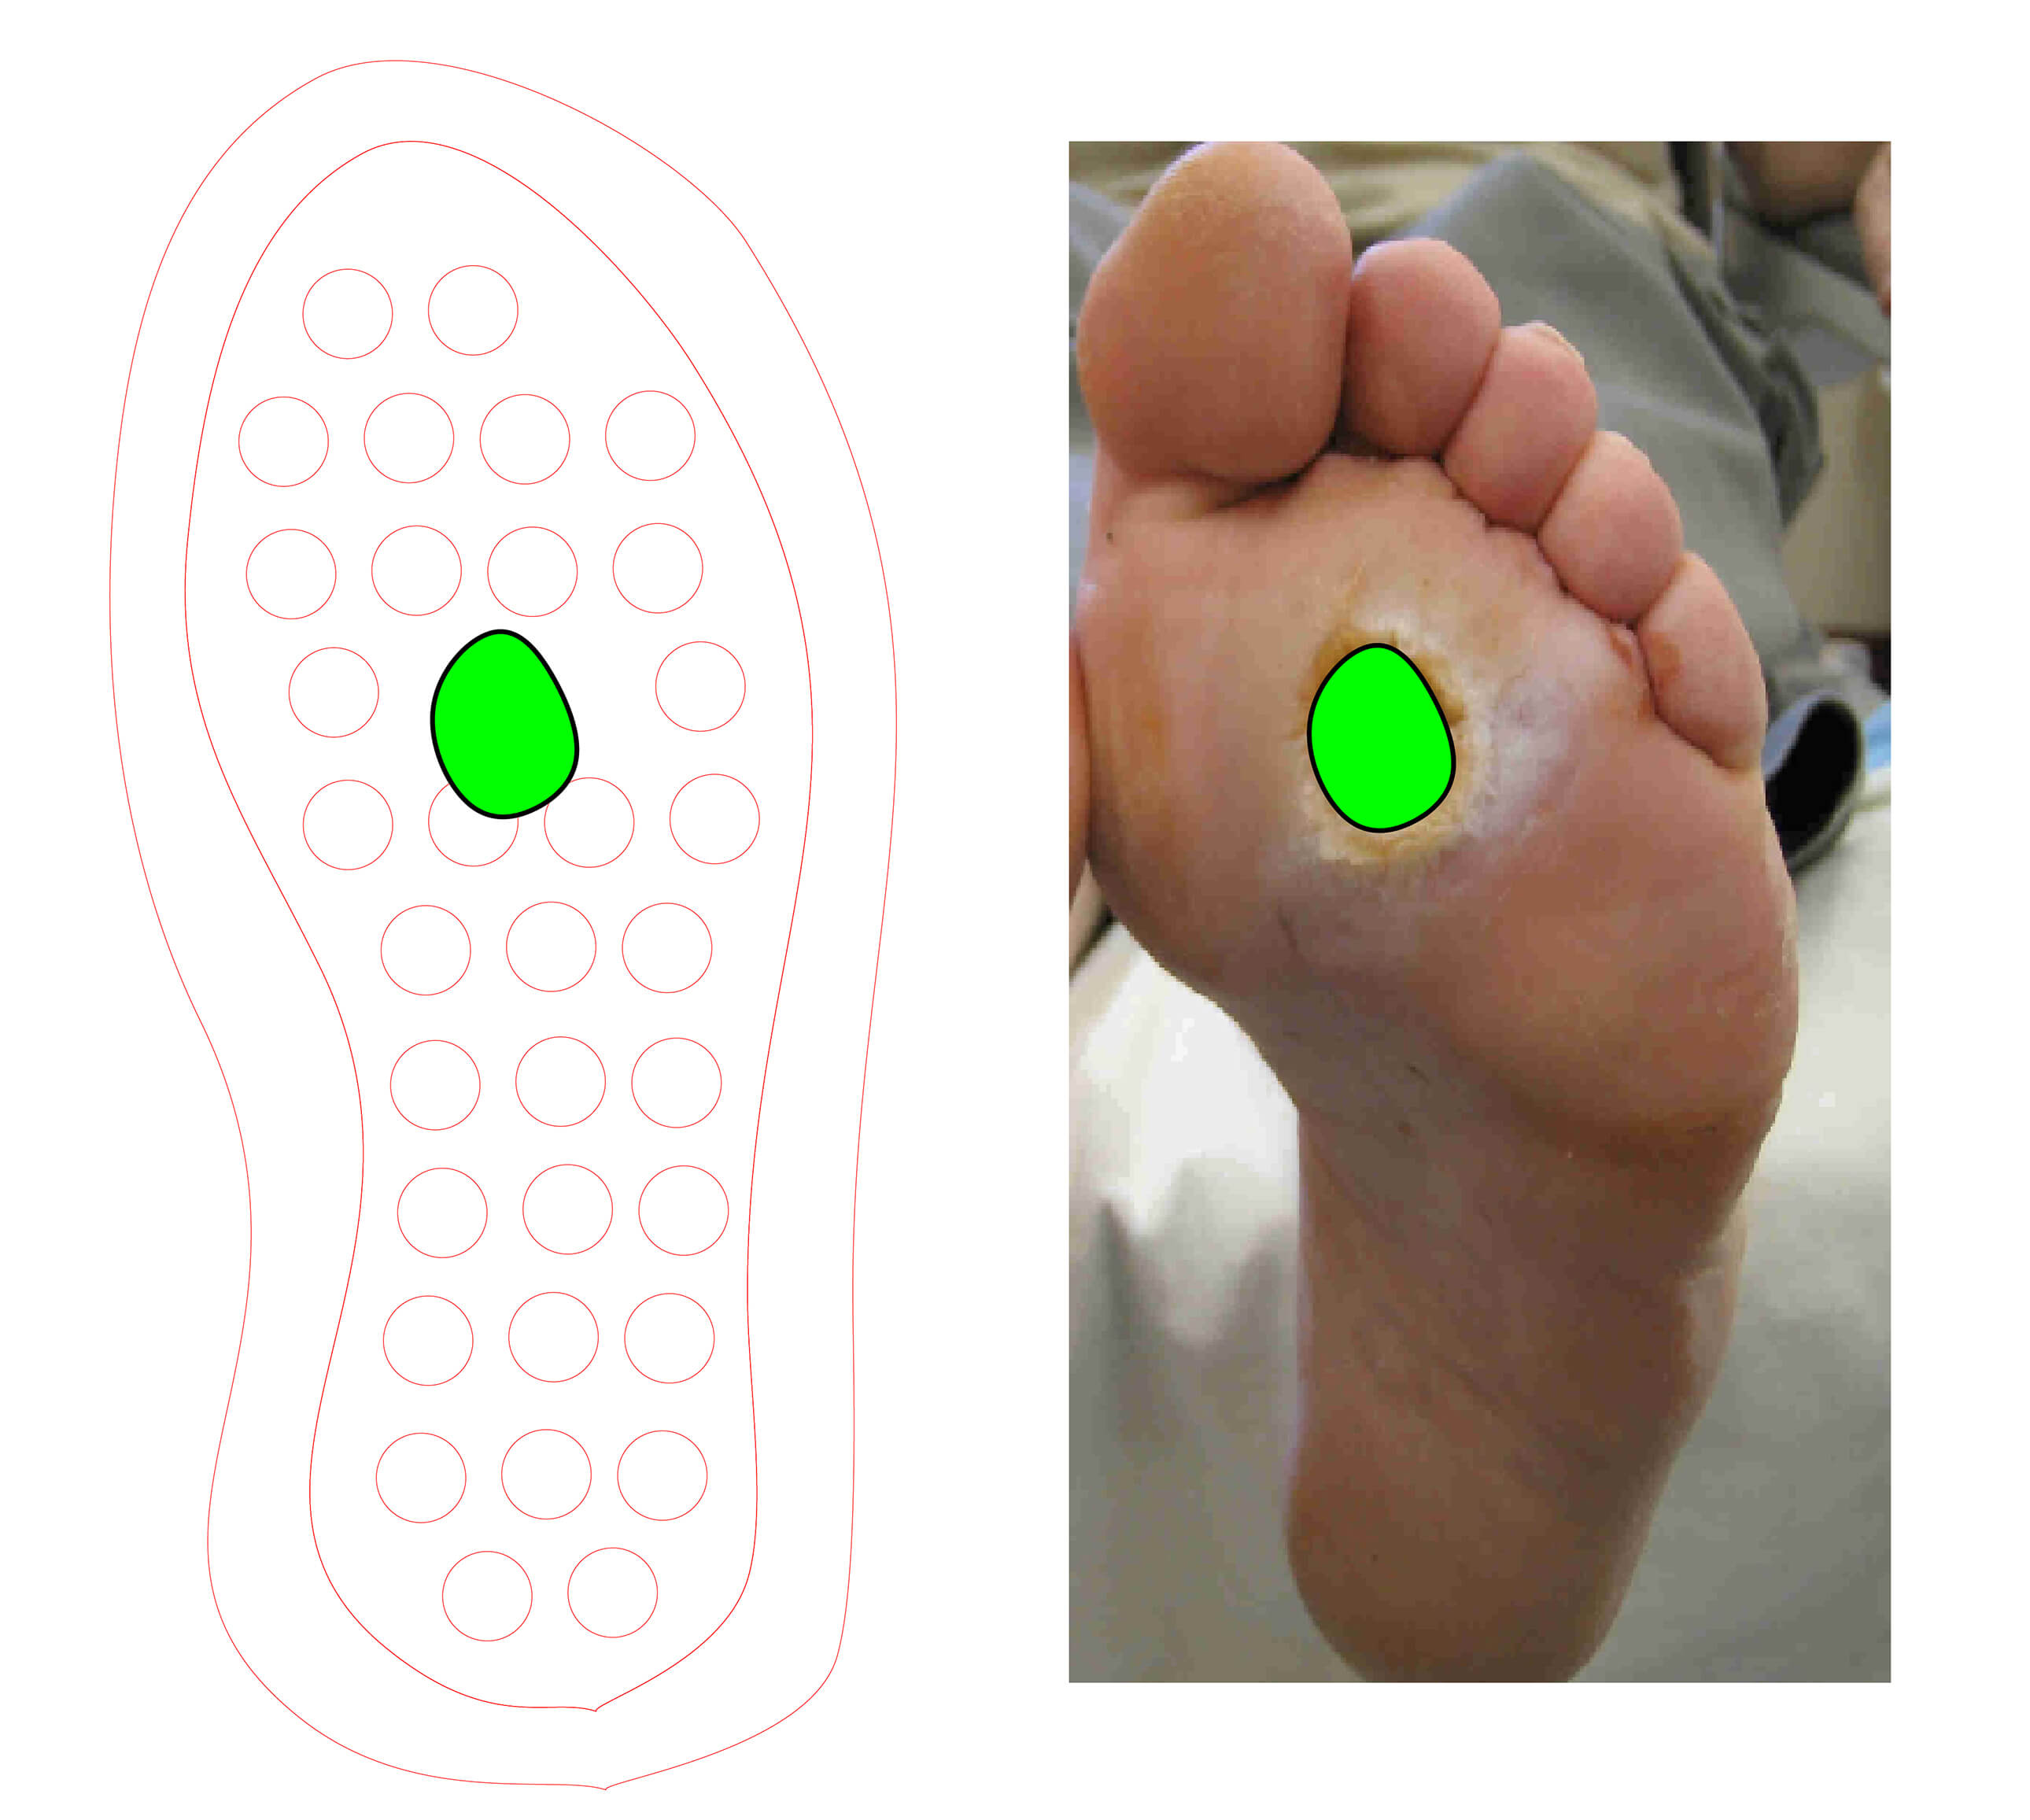 Successful treatment of diabetic foot ulcer during COVID-19 lockdown using  Cadexomer Iodine: Case report